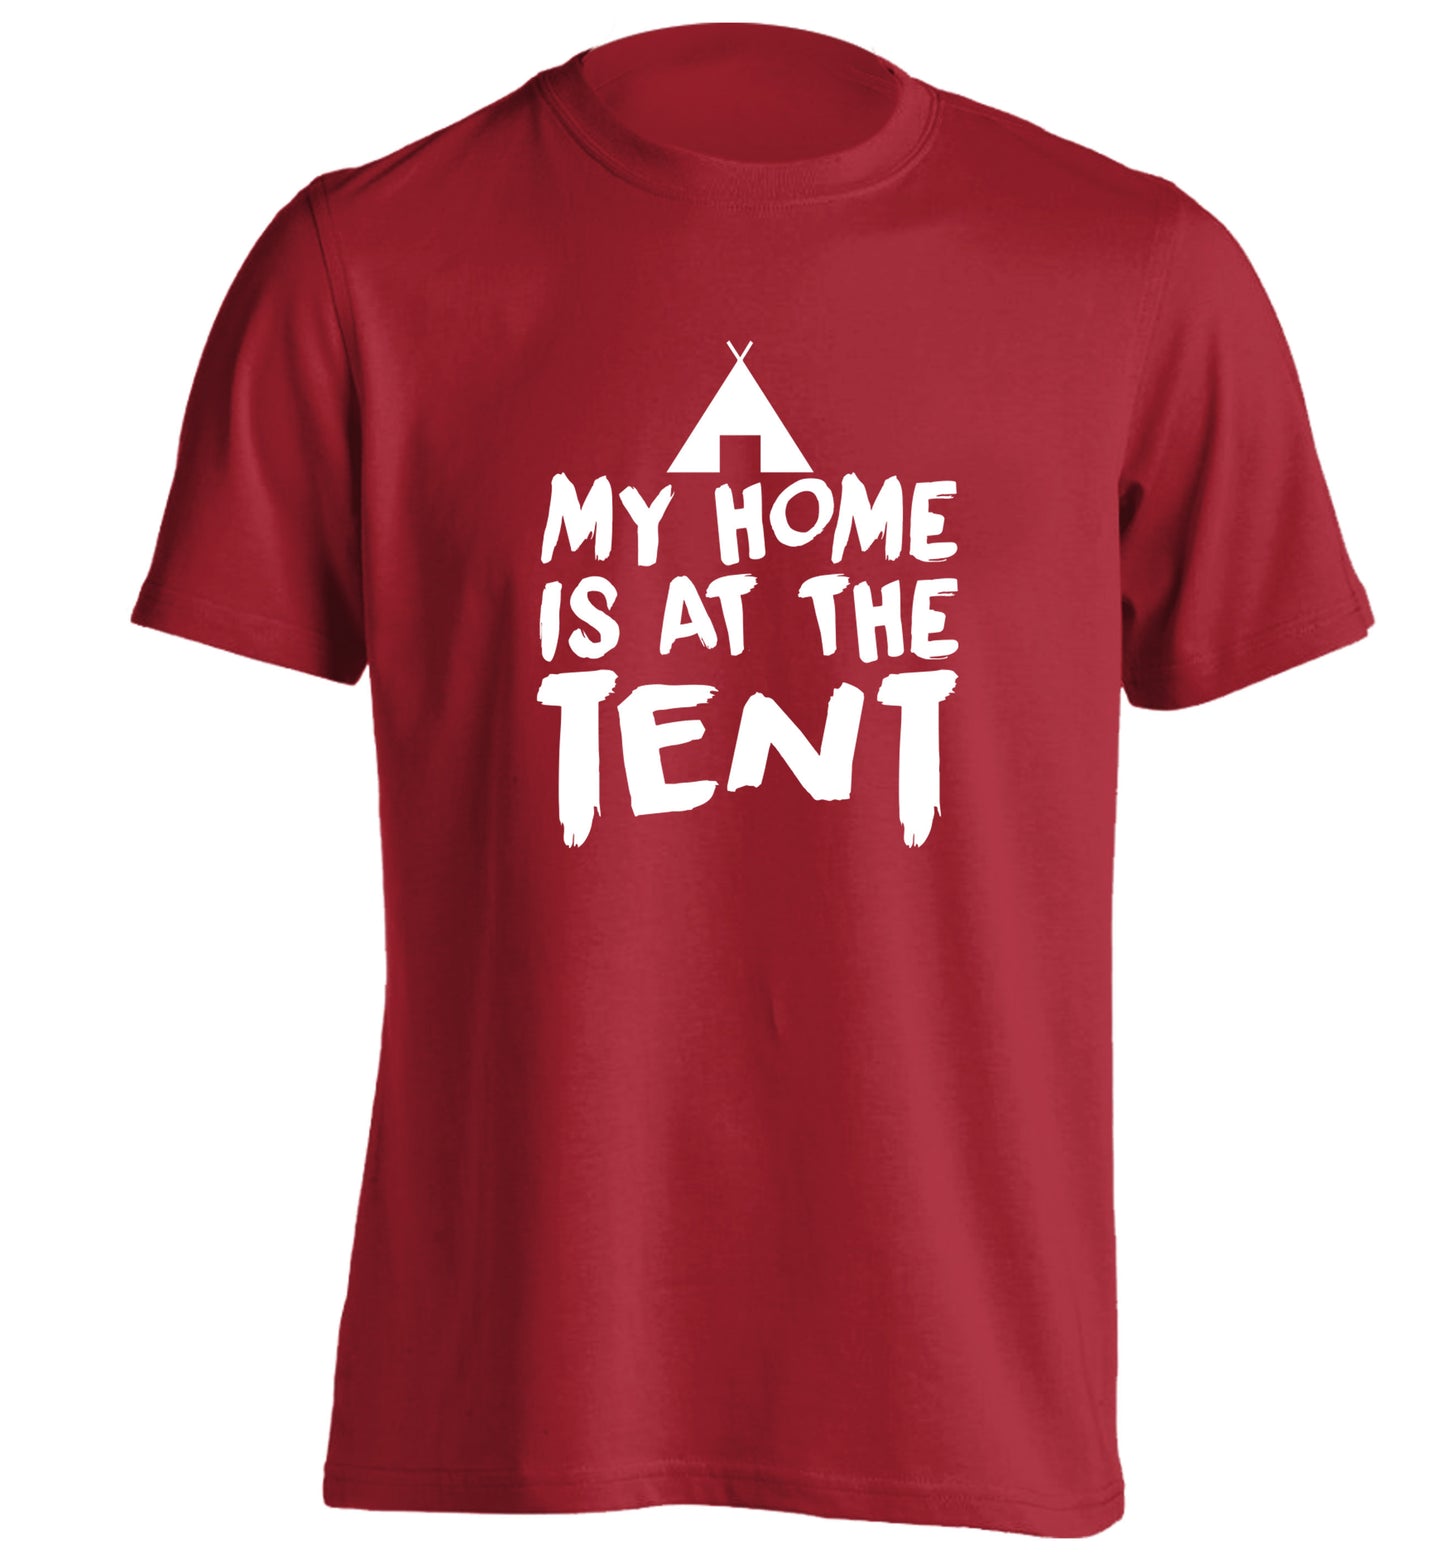 My home is at the tent adults unisex red Tshirt 2XL